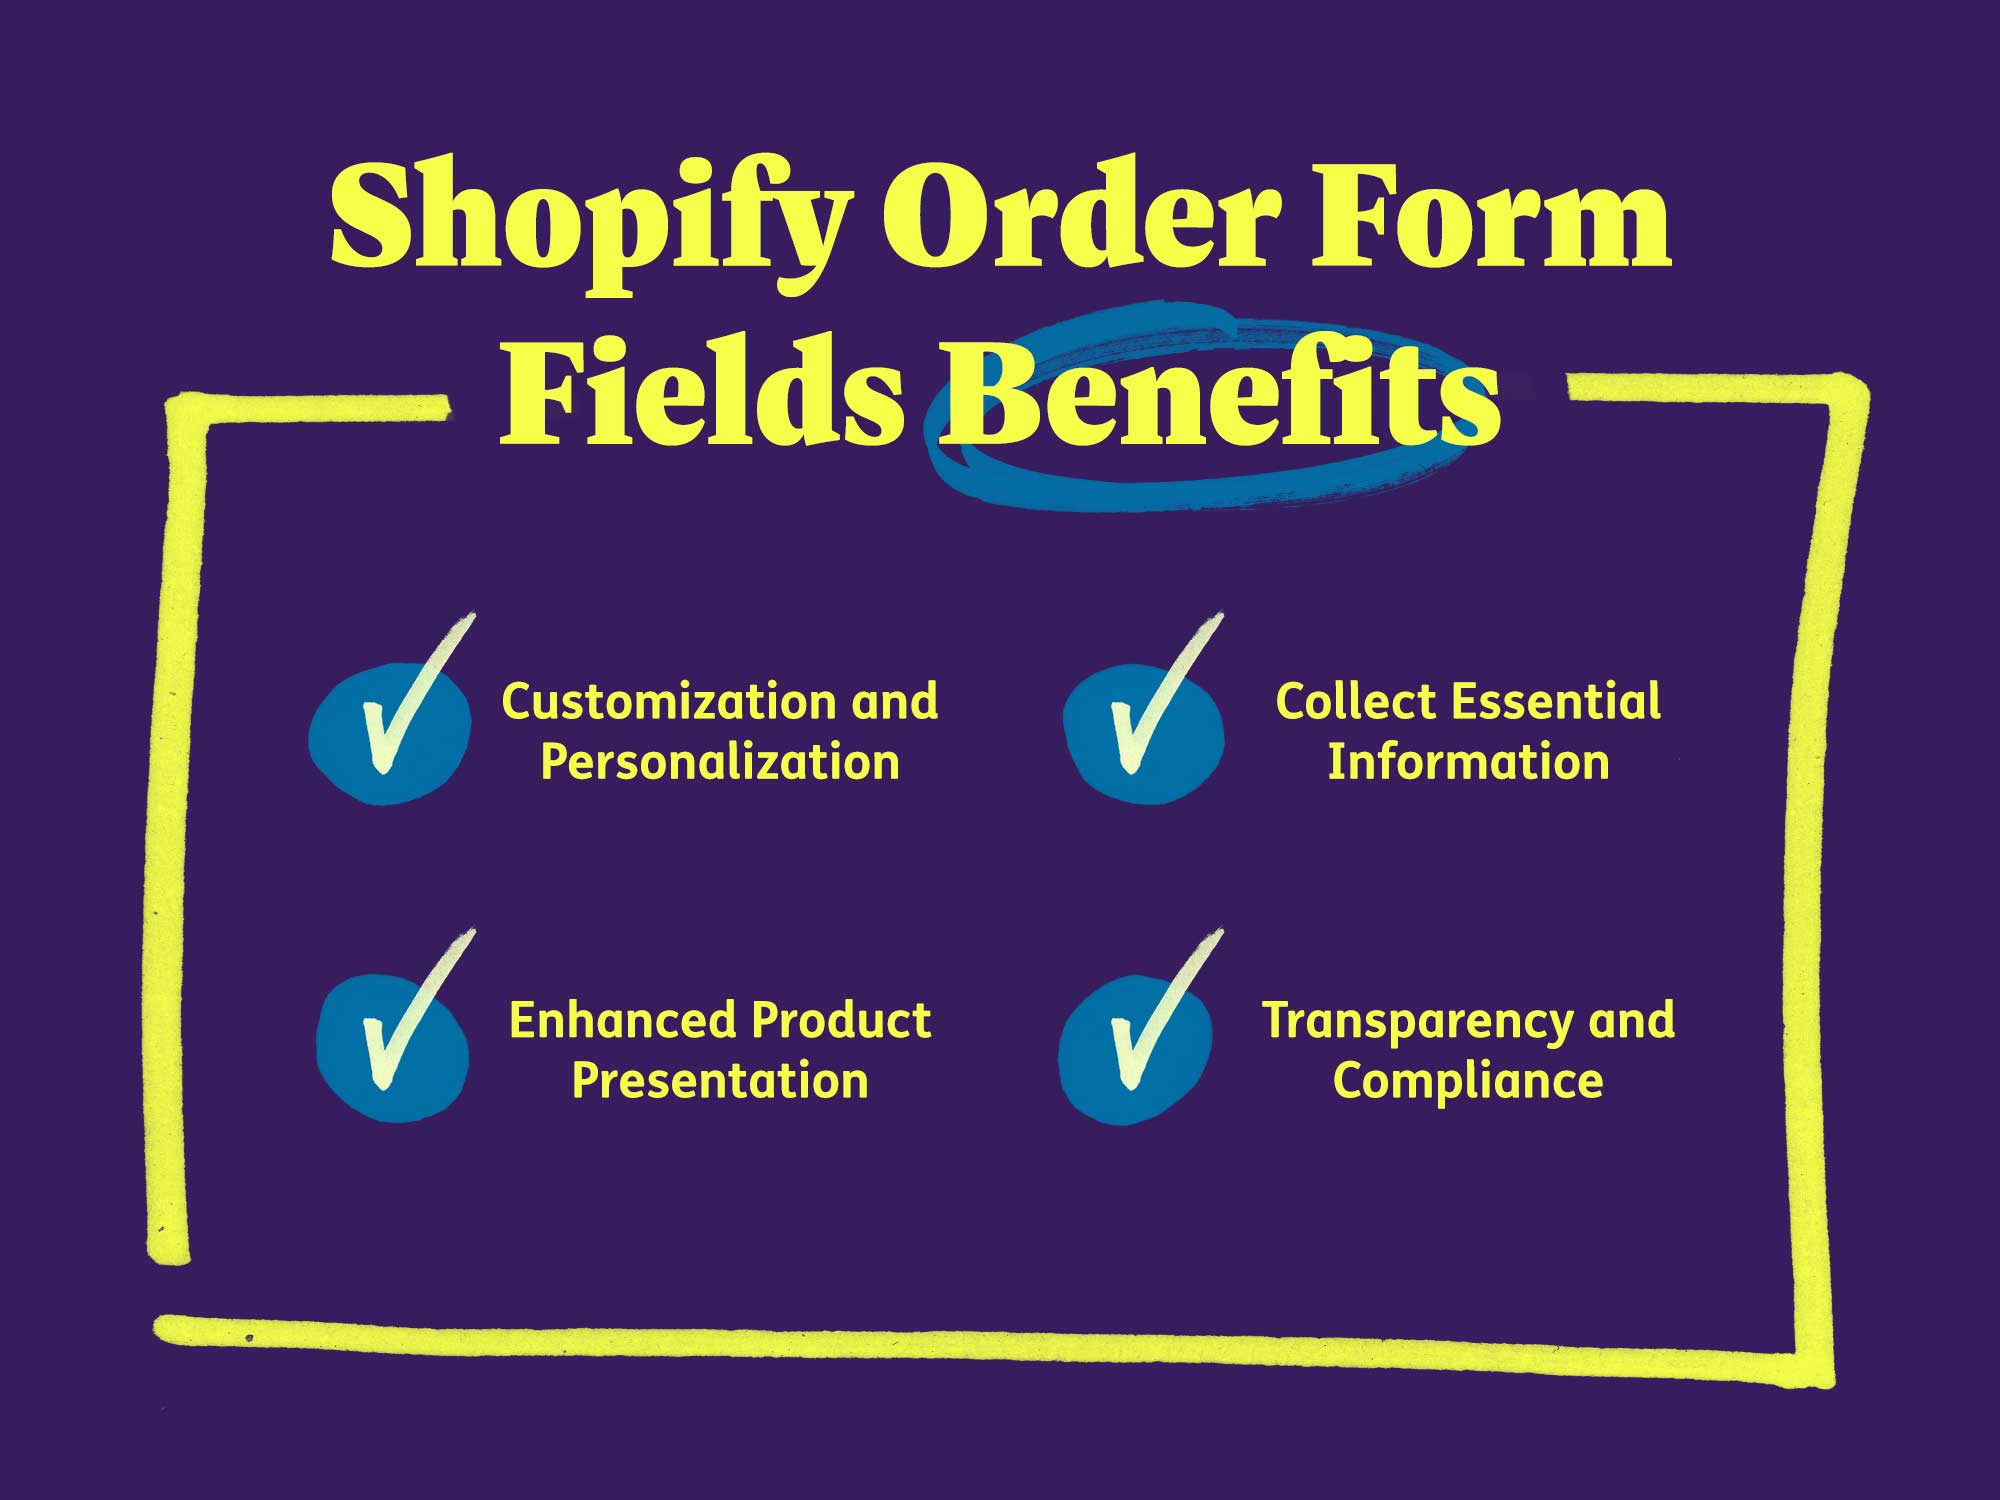 Shopify Order Form Fields Benefits: Customization and Personalization, Collect Essential Information, Enhanced Product Presentation, Transparency and Compliance.